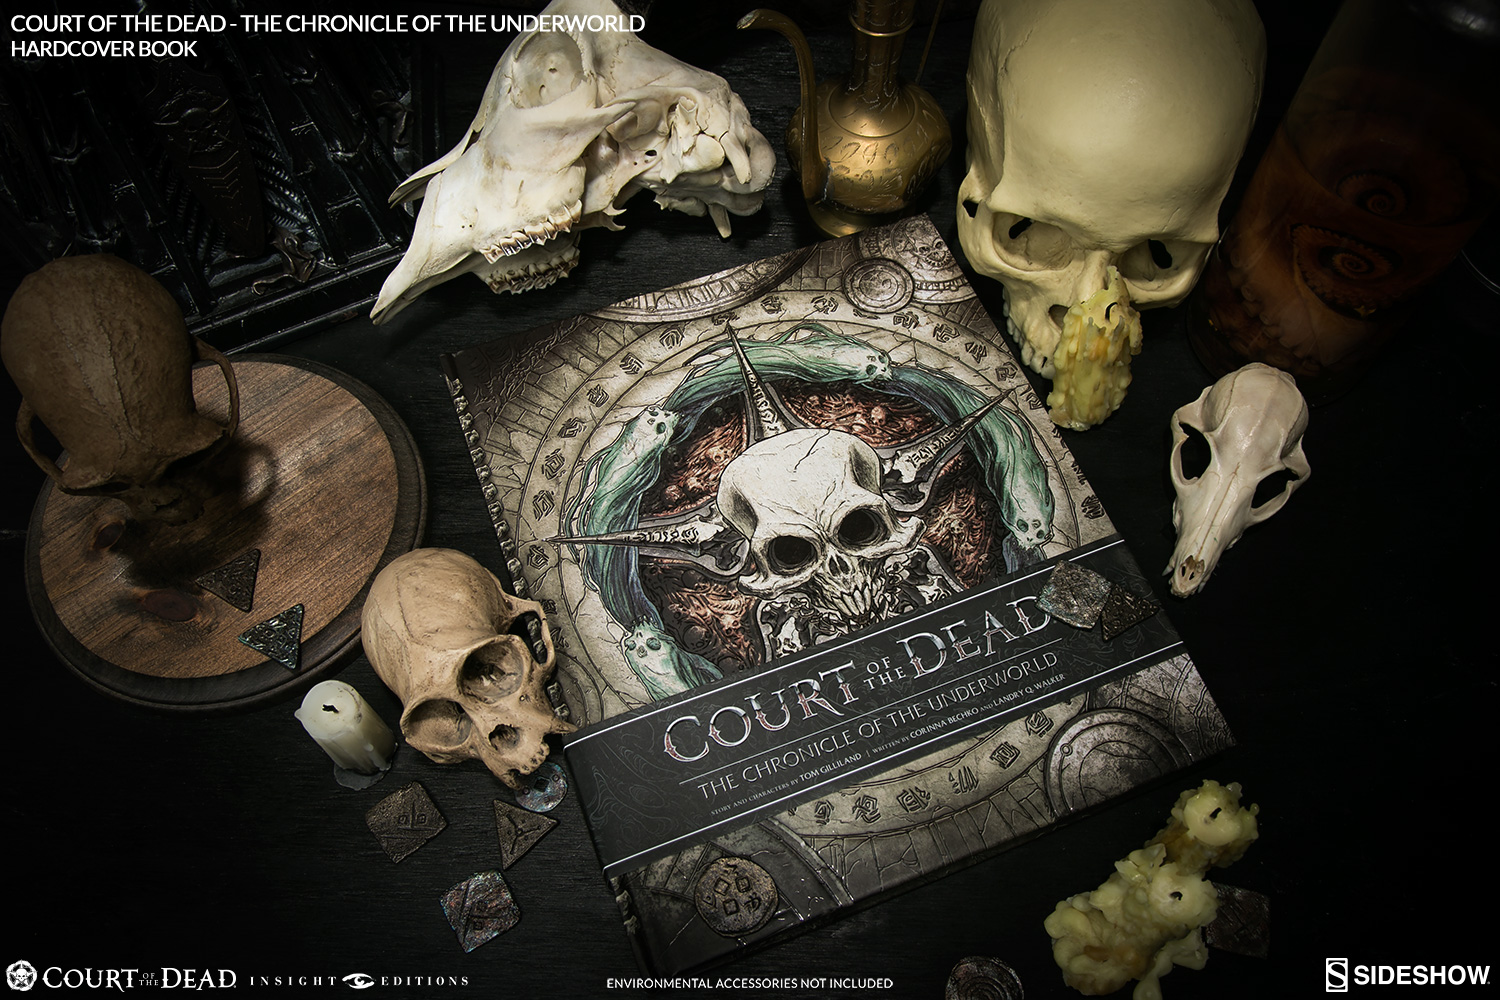 Sideshow Court of the Dead Books, Comics, Prints... Court-of-the-dead-the-chronicle-of-the-underworld-book-500241-02